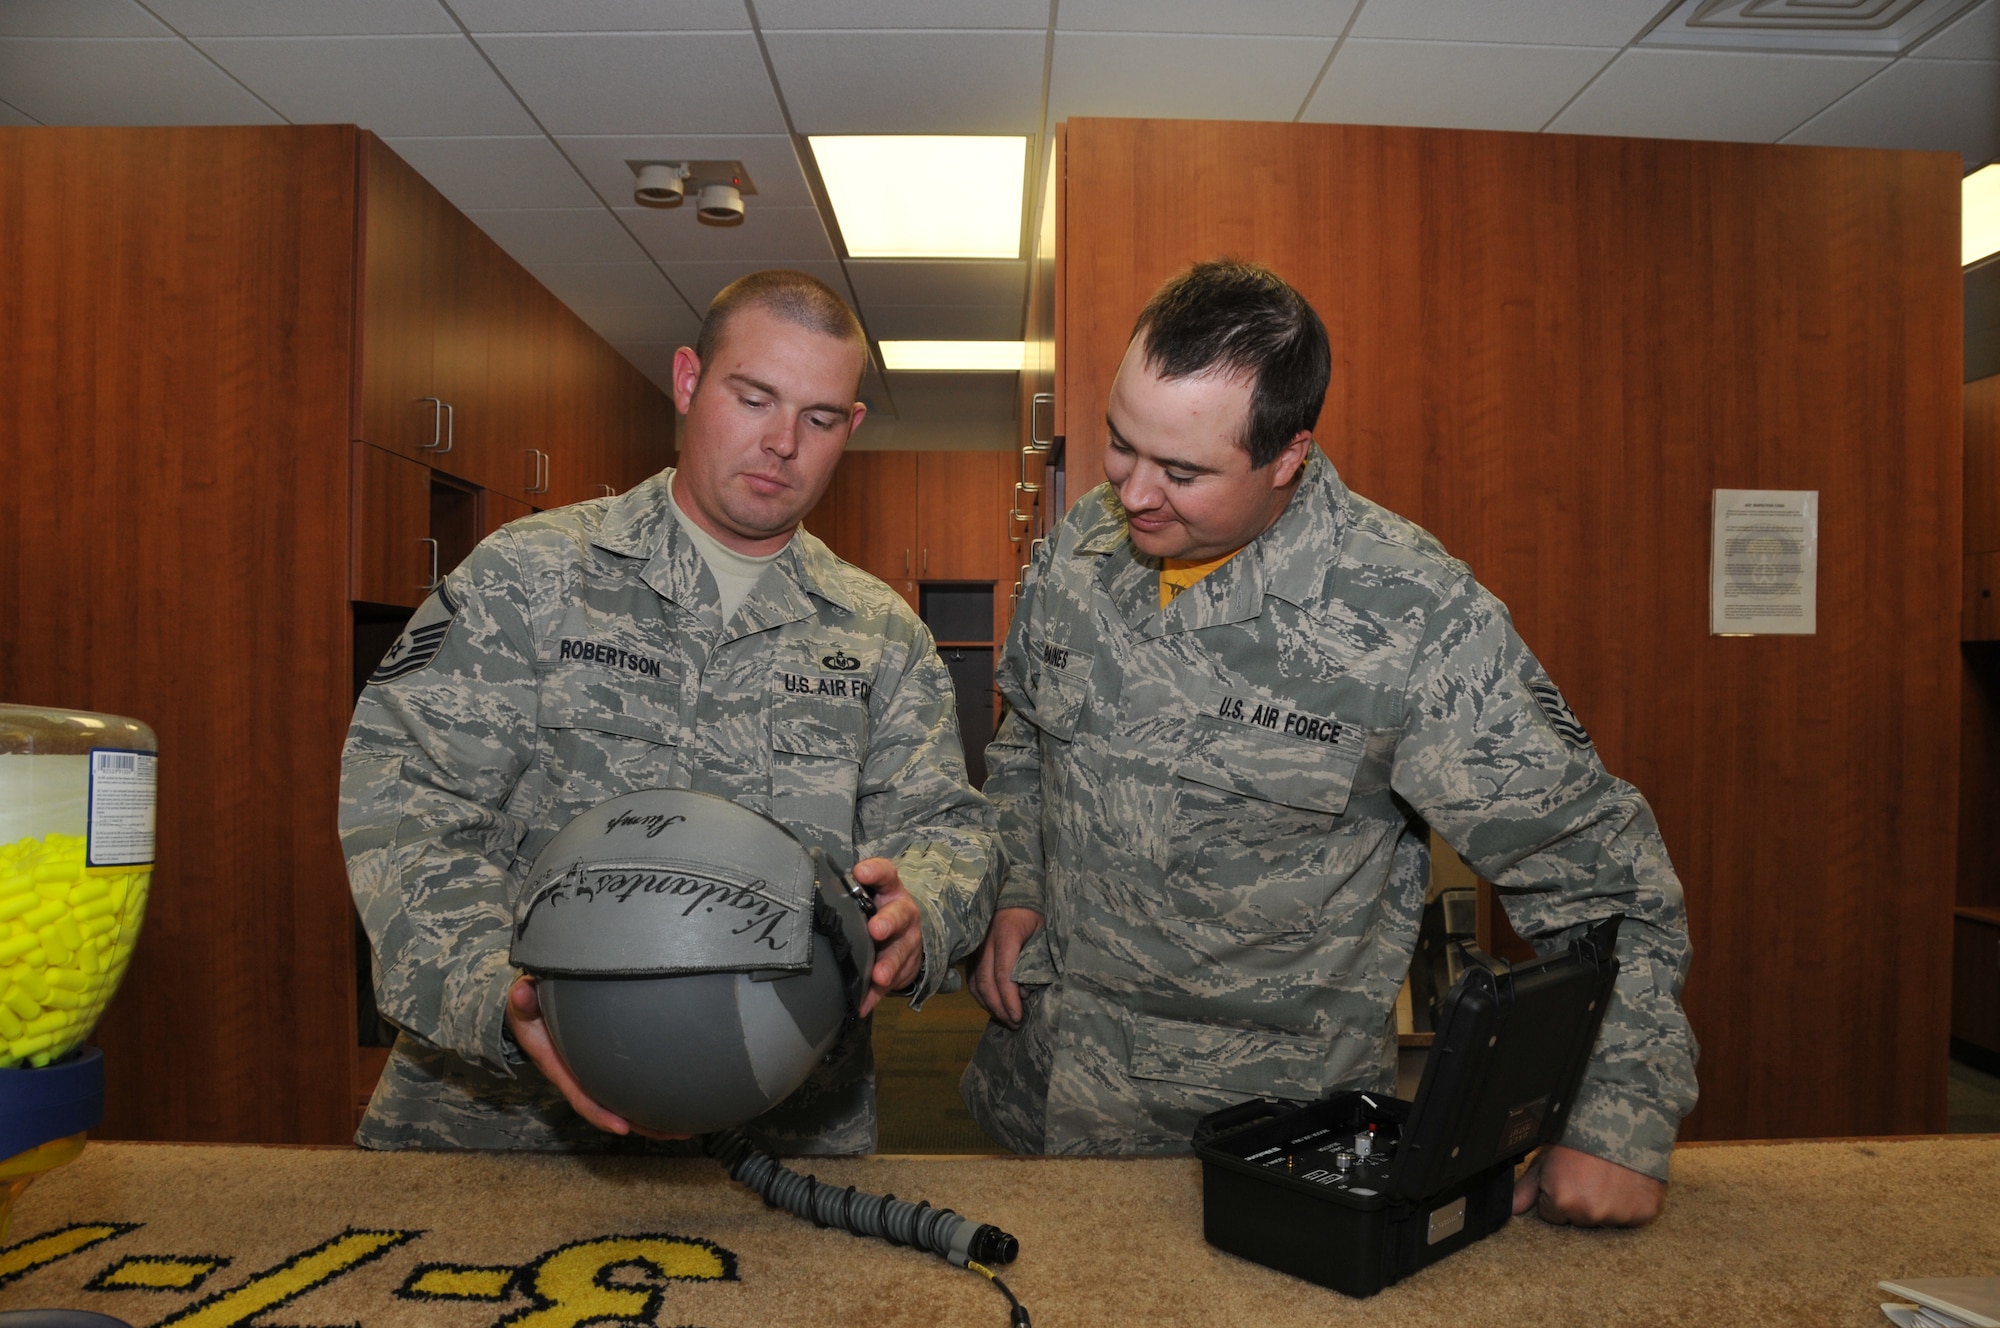 120th Fighter Wing Master Sgt. Raegen Robertson and Tech. Sgt. James Raines inspect a helmet during a post-flight check in the Aircrew Flight Equipment section on June 24, 2011. 
(U.S. Air Force photo by Senior Master Sgt. Eric Peterson.)